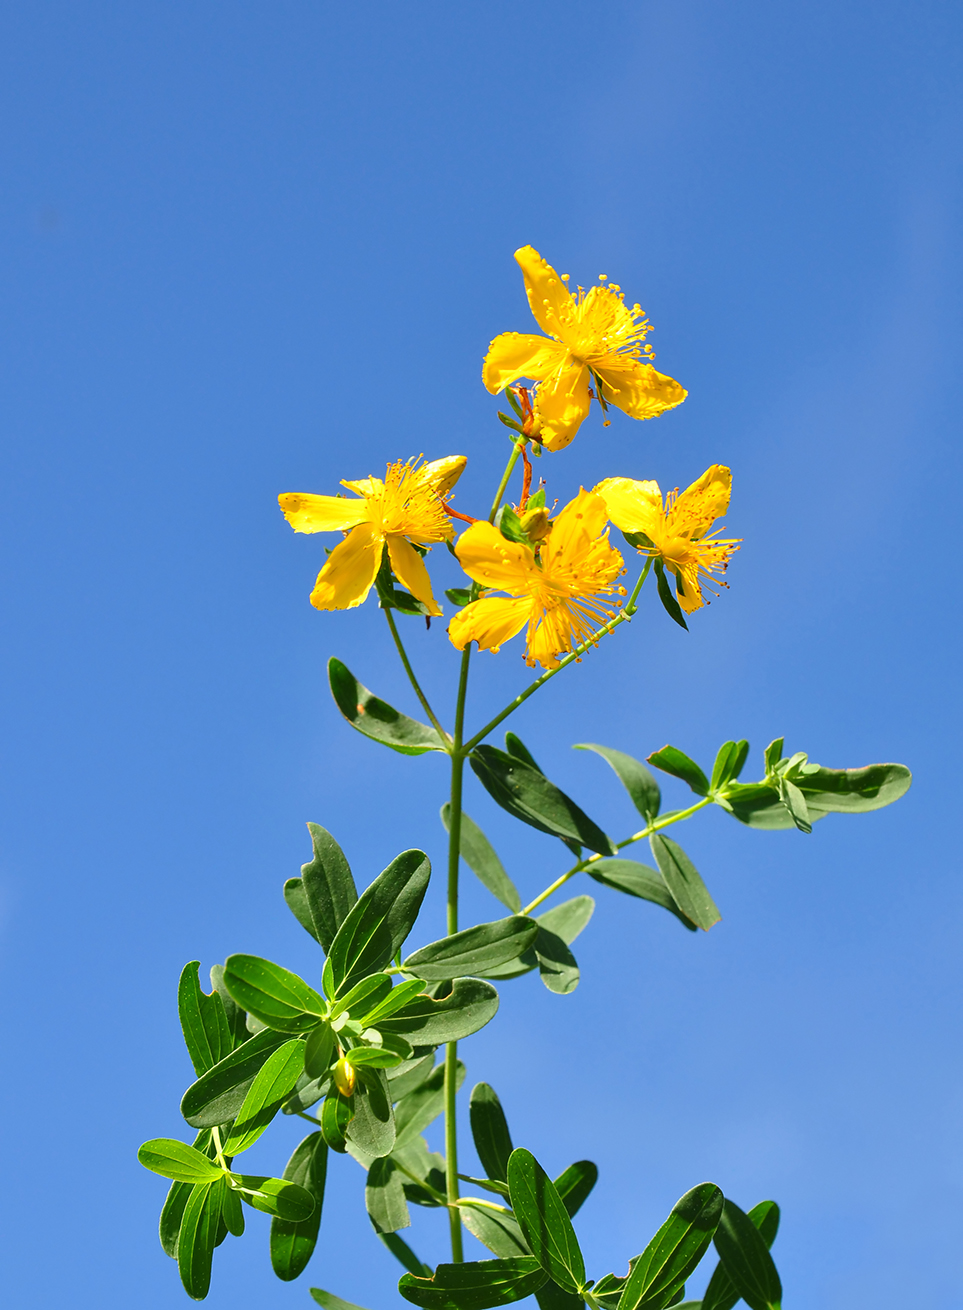 Bright yellow St John's Wort flowers standing tall against a bright blue sky